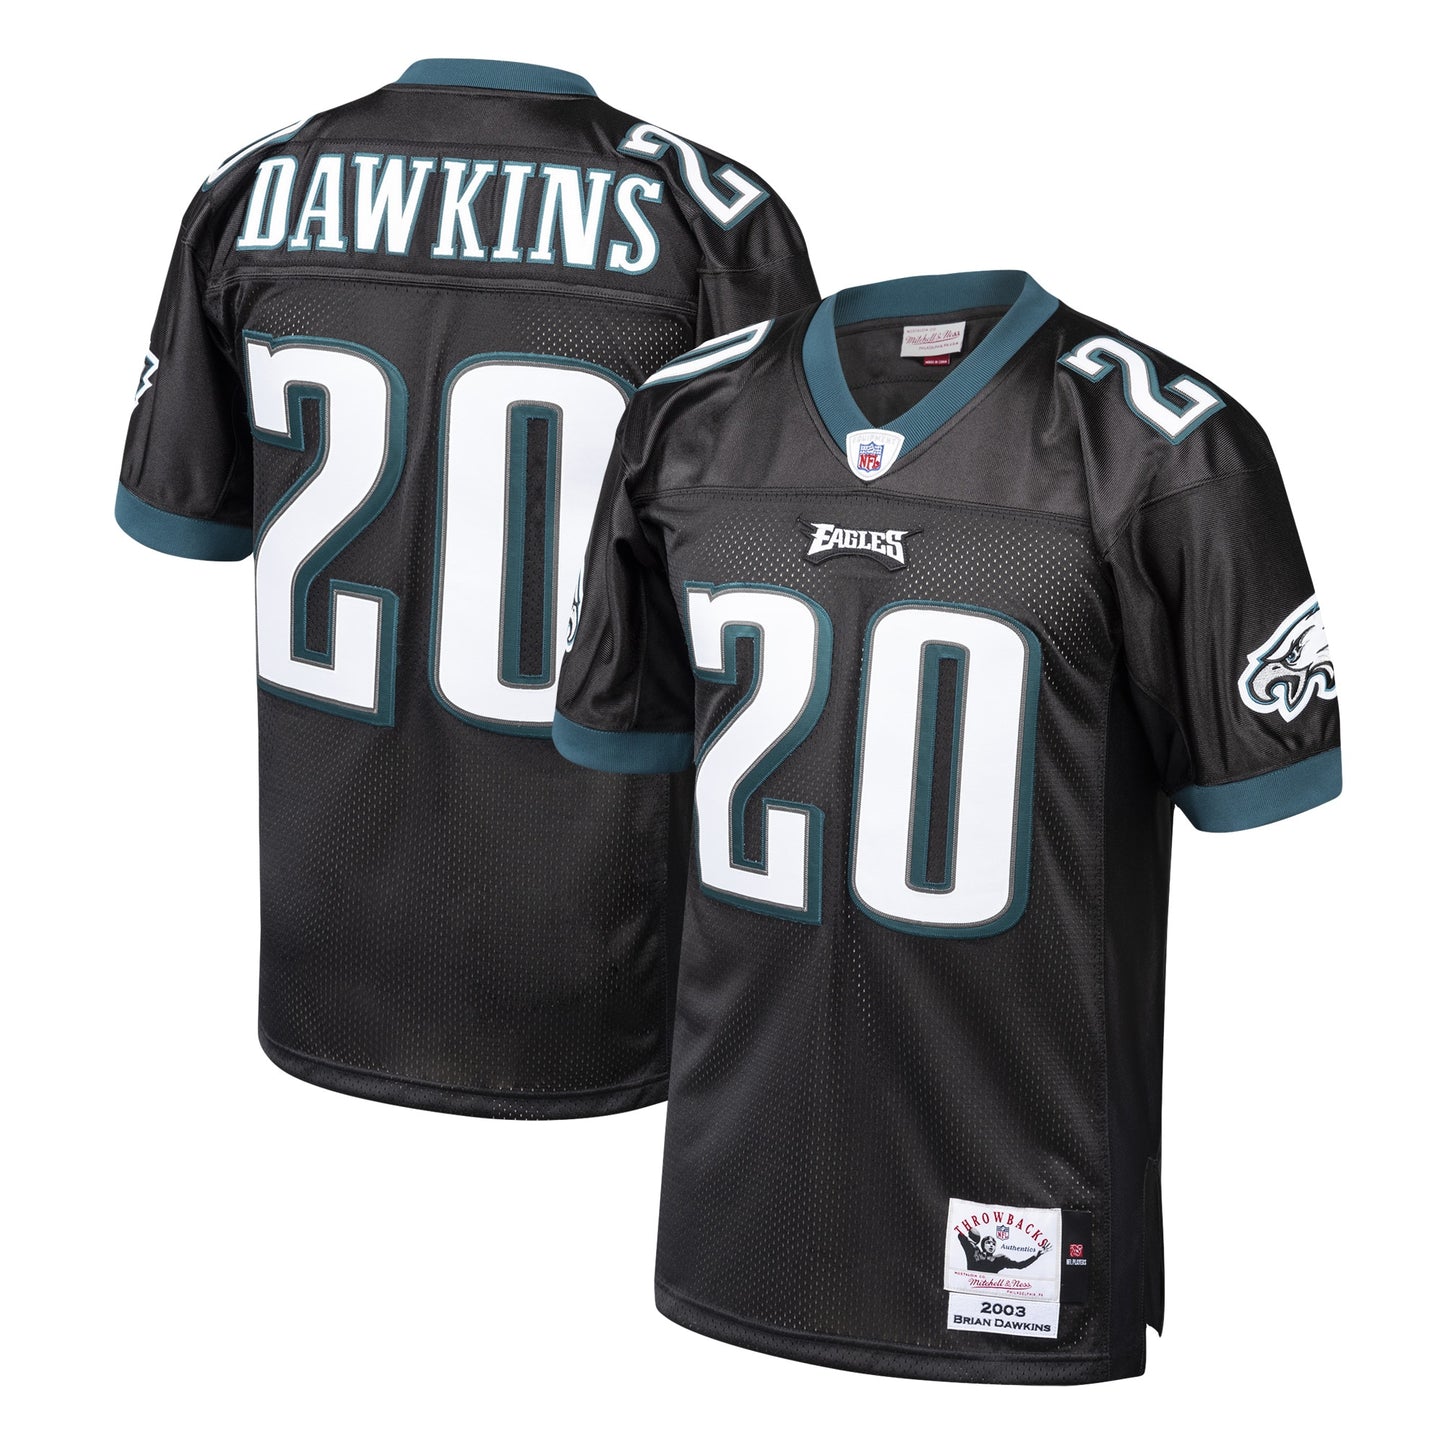 Brian Dawkins Philadelphia Eagles Mitchell & Ness 2003 Authentic Throwback Retired Player Jersey - Black